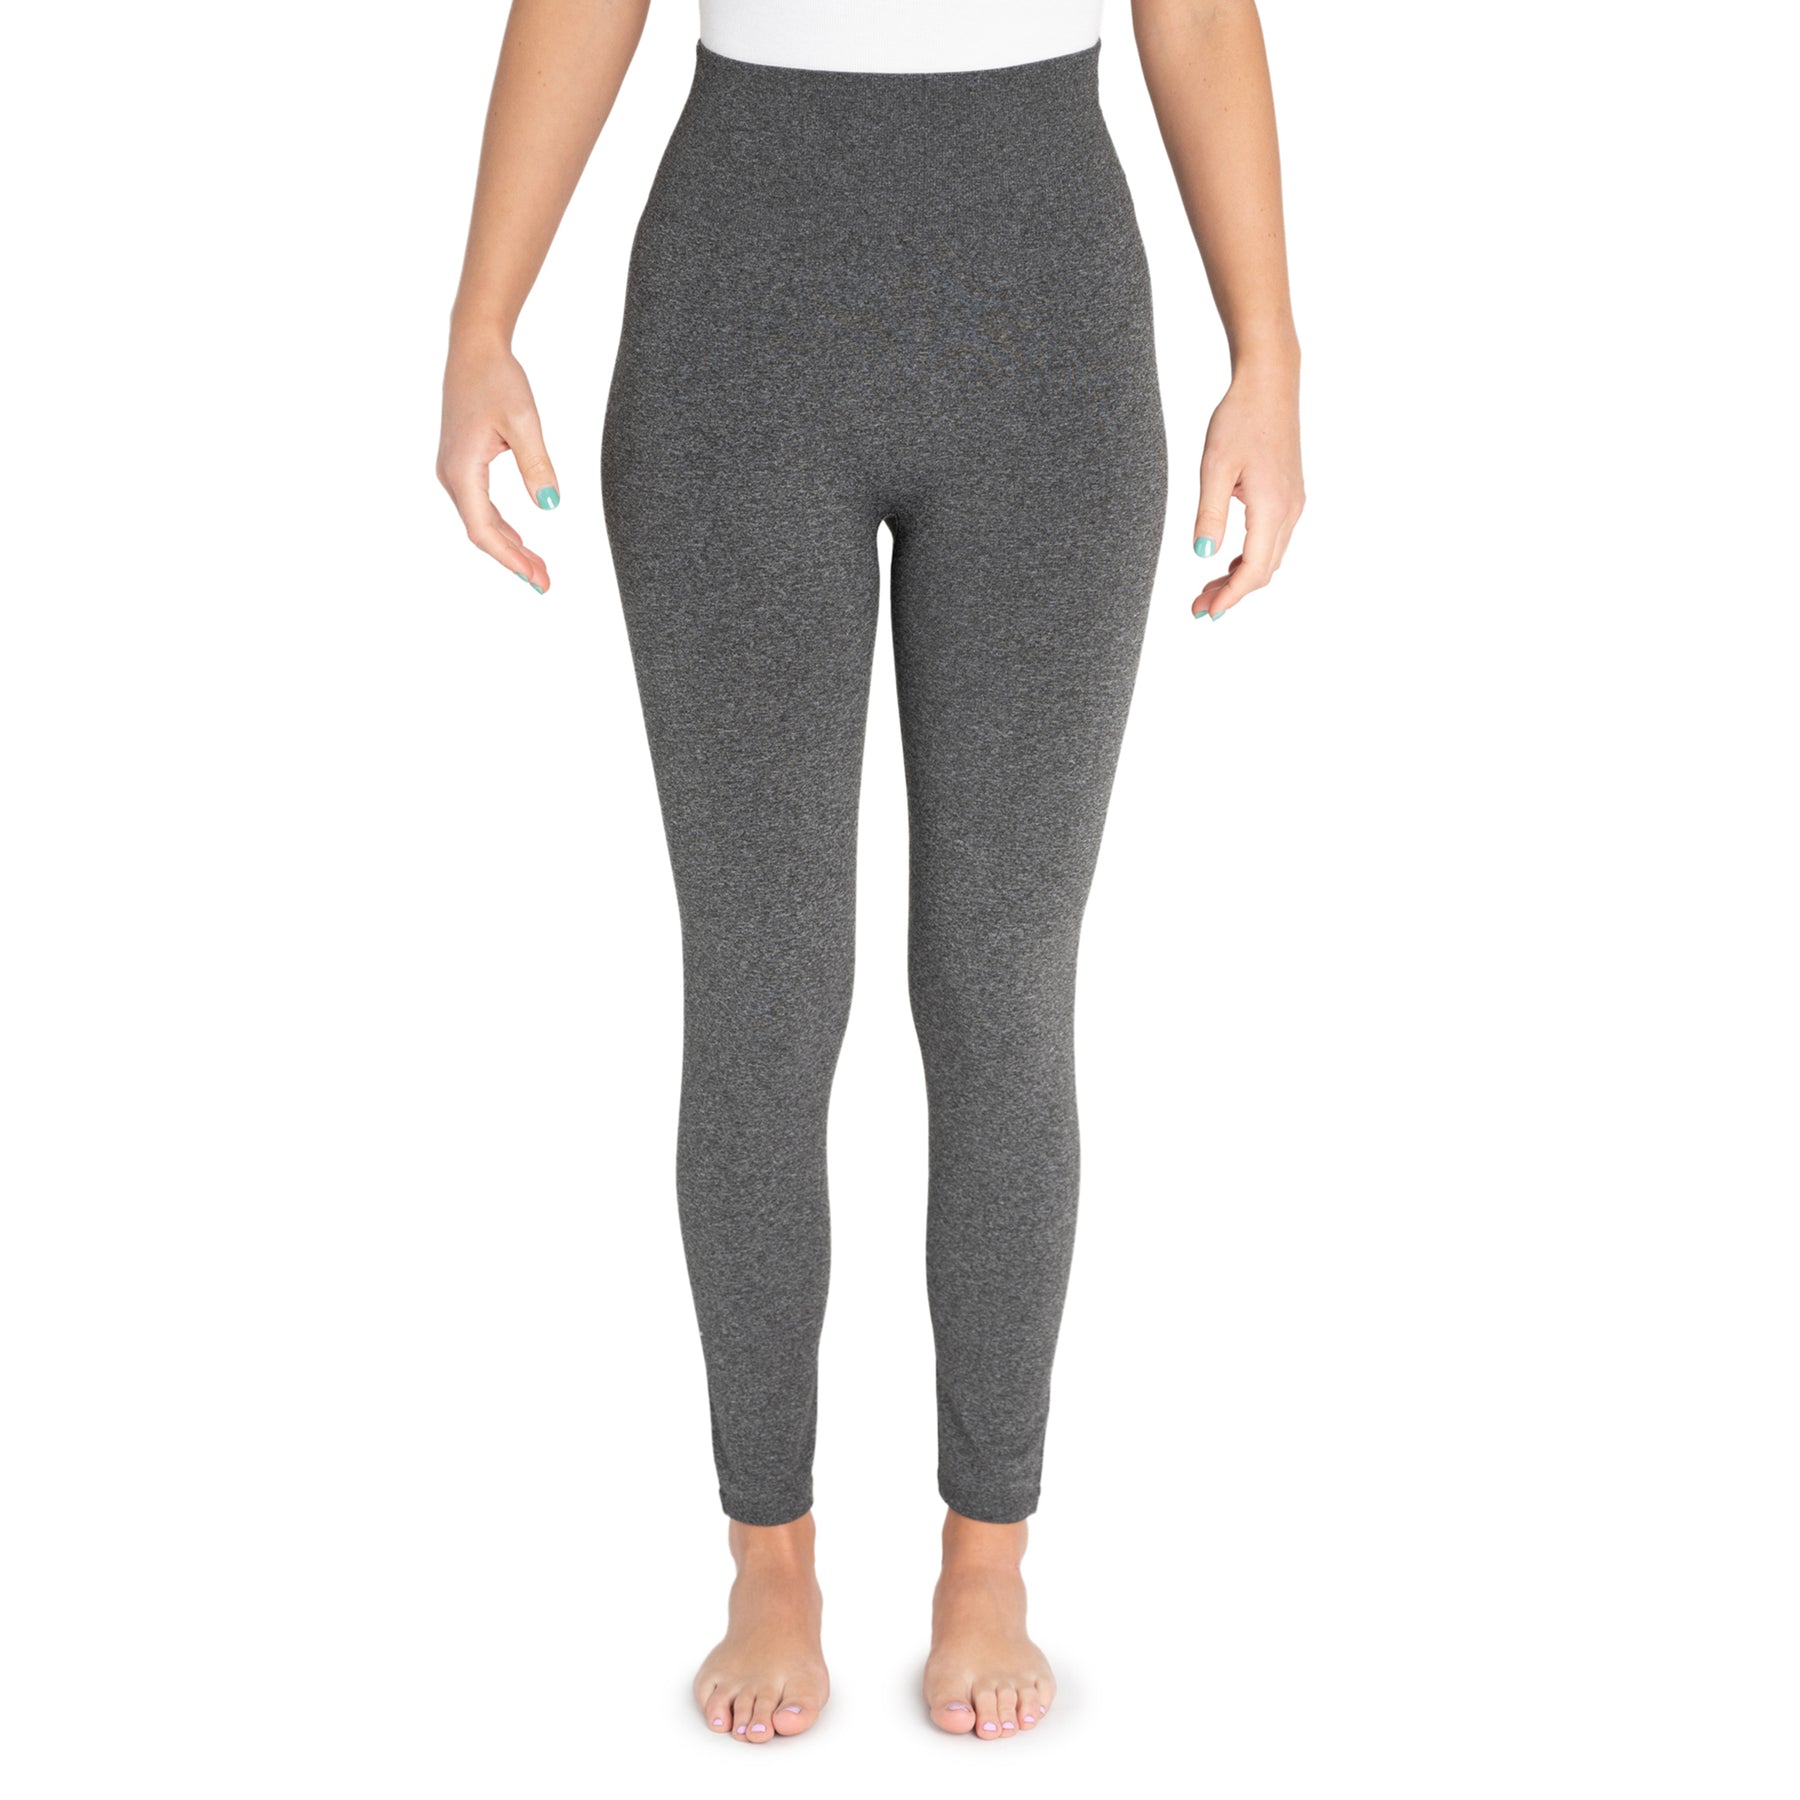 New Mix By Kathy fleece lined leggings